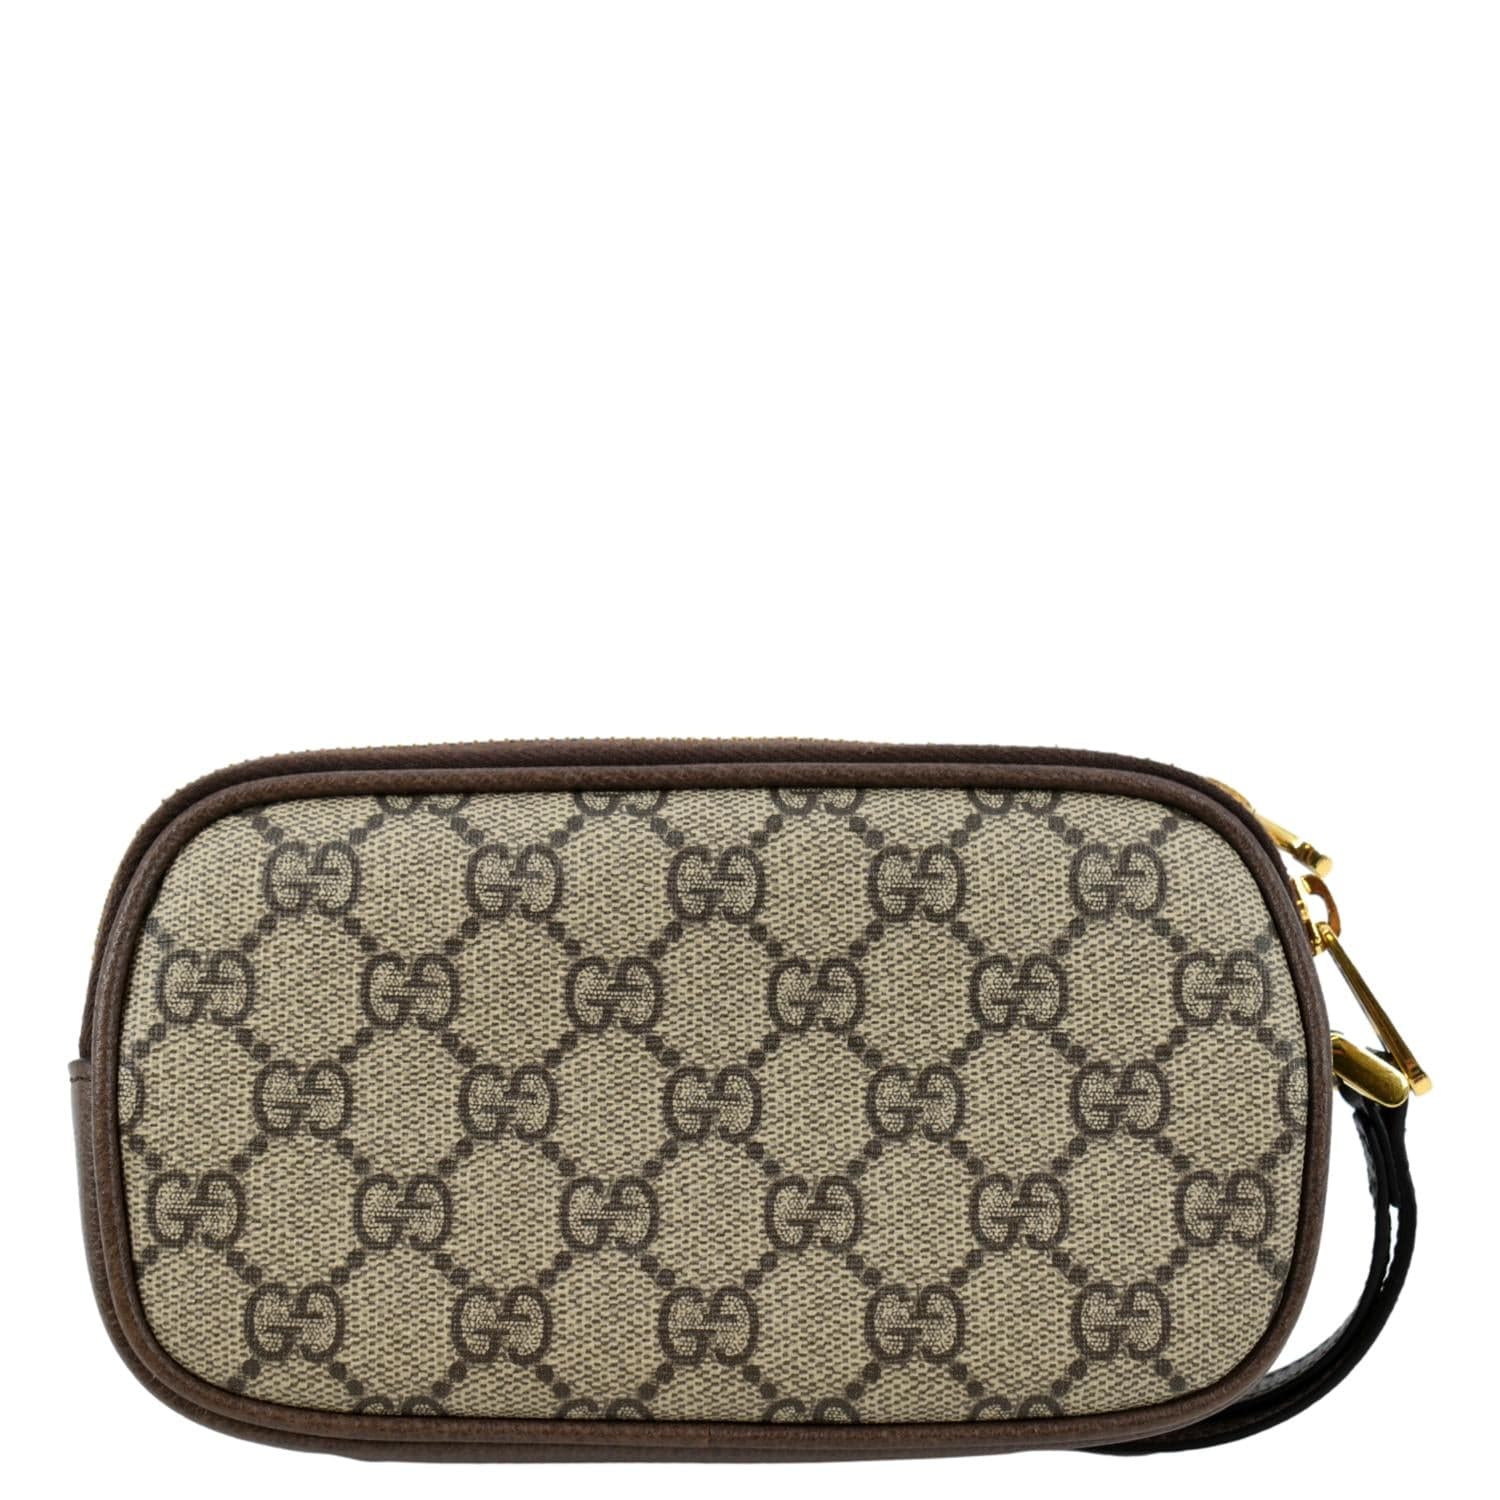 Gucci GG Supreme Monogram Ophidia Wristlet Pouch. Made In Italy.